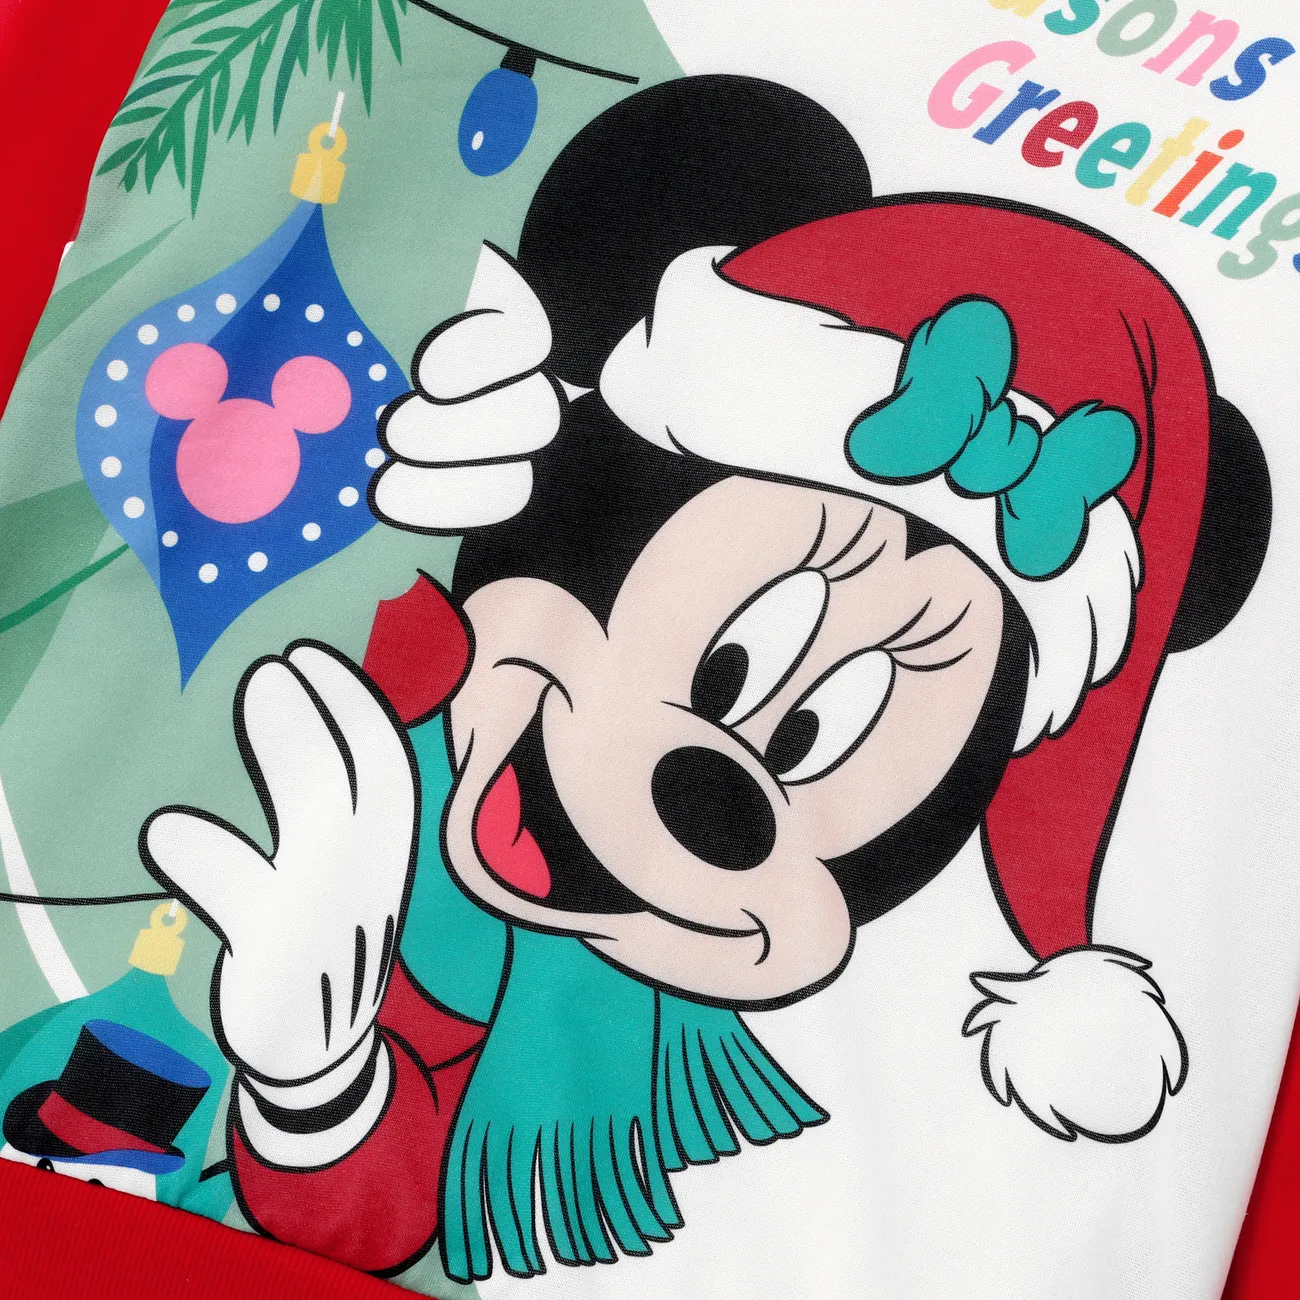 Disney Mickey and Friends Family Matching Christmas Character Print Long-sleeve Sweatshirt  Red big image 1